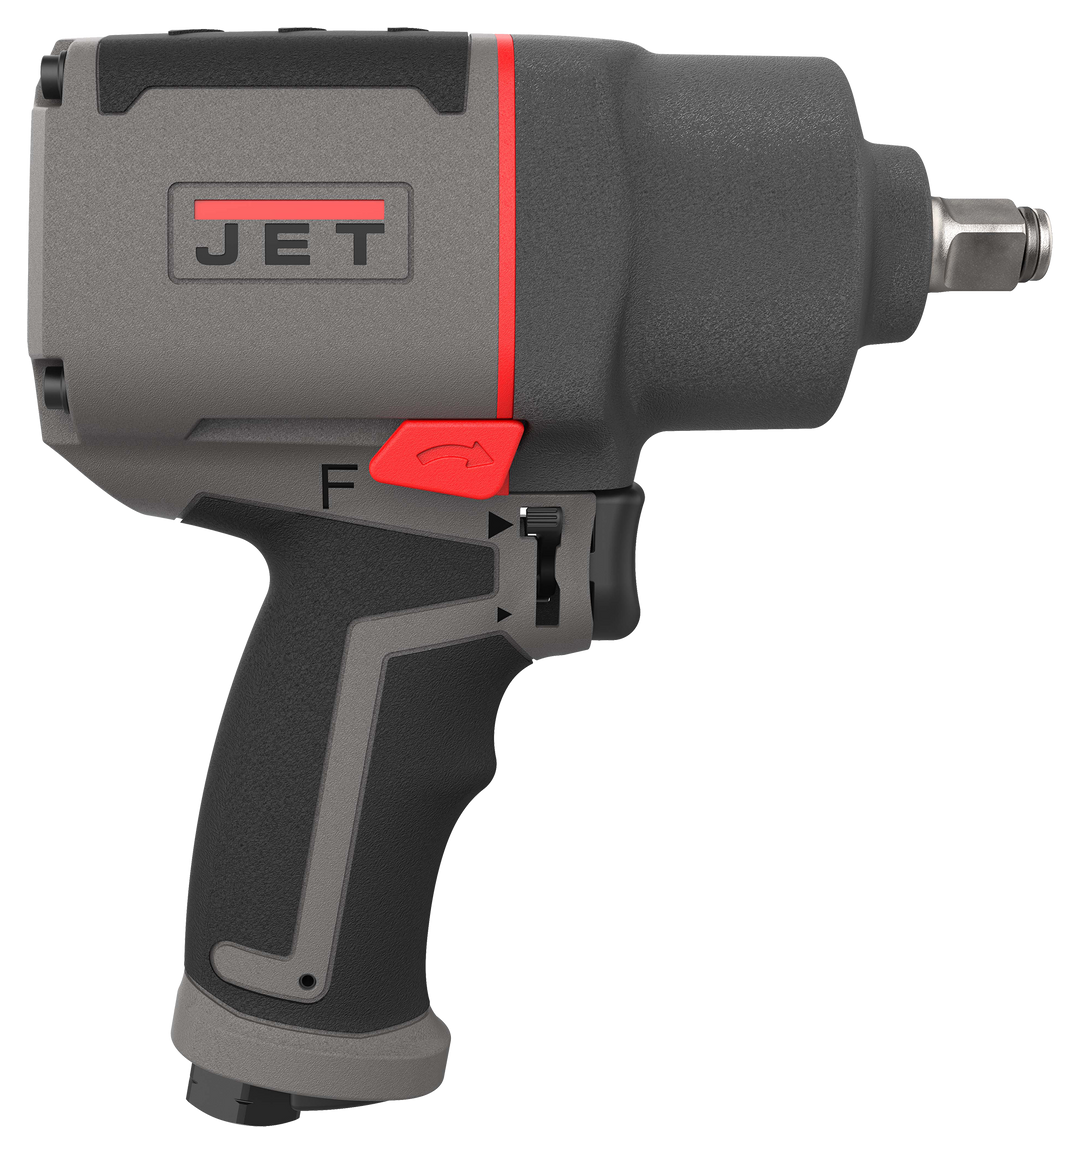 JET 1/2" Composite Impact Wrench